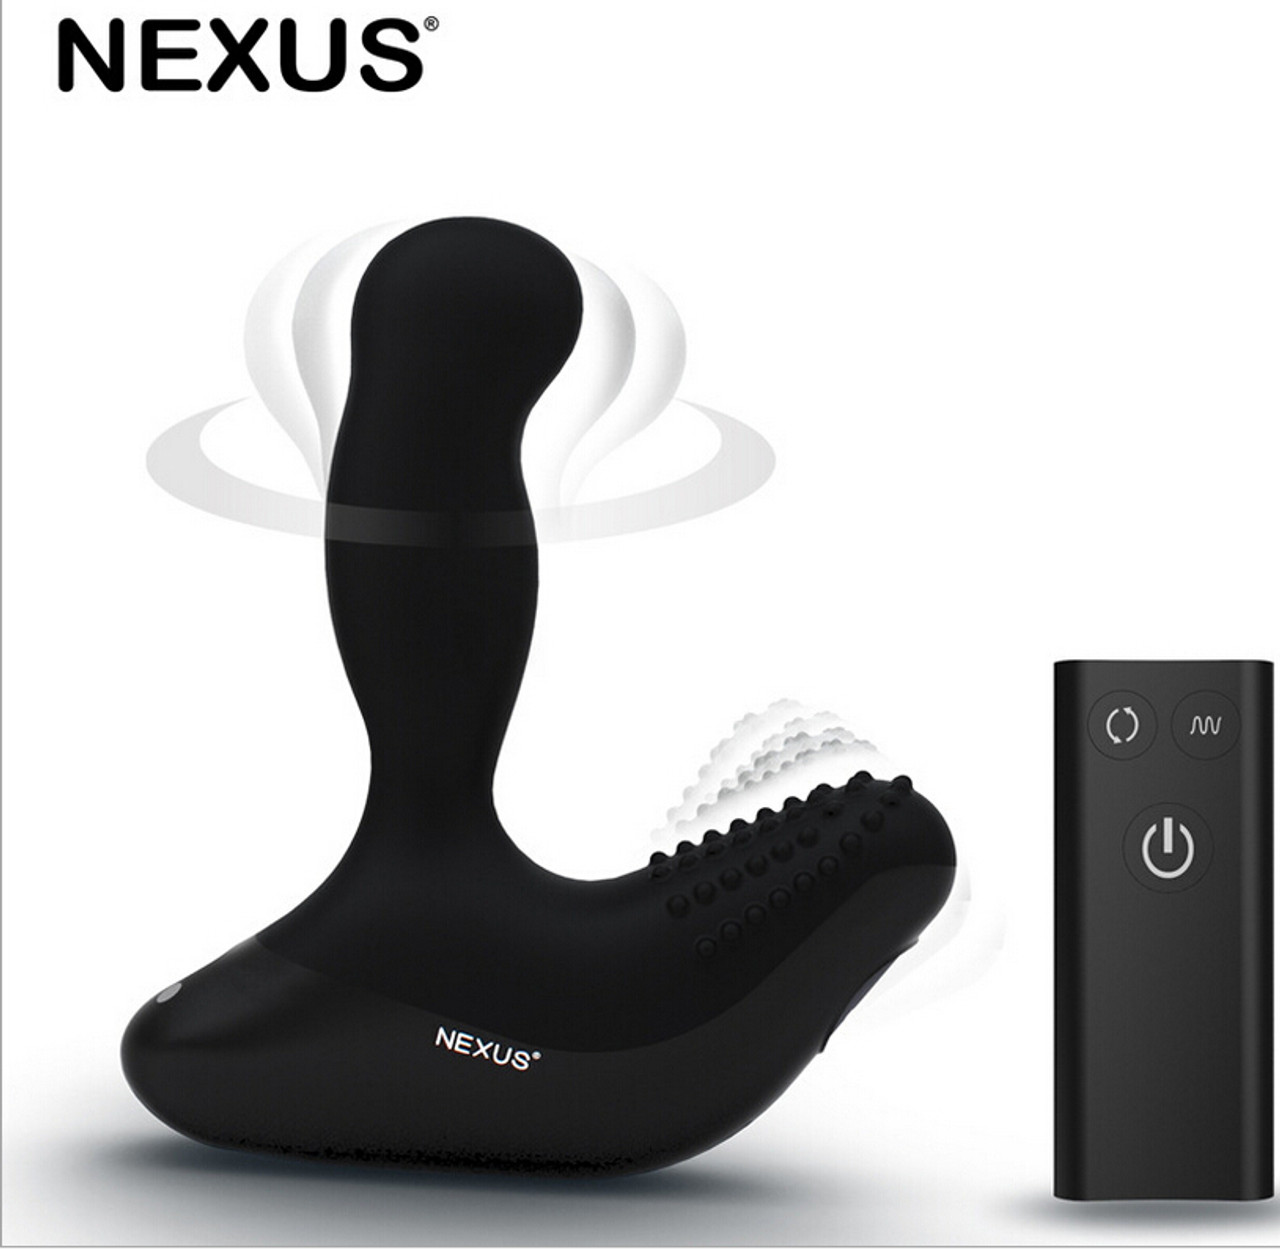 Nexus Revo Stealth Remote Rechargeable Vibrating Silicone Rotating Prostate Massager Dallas 